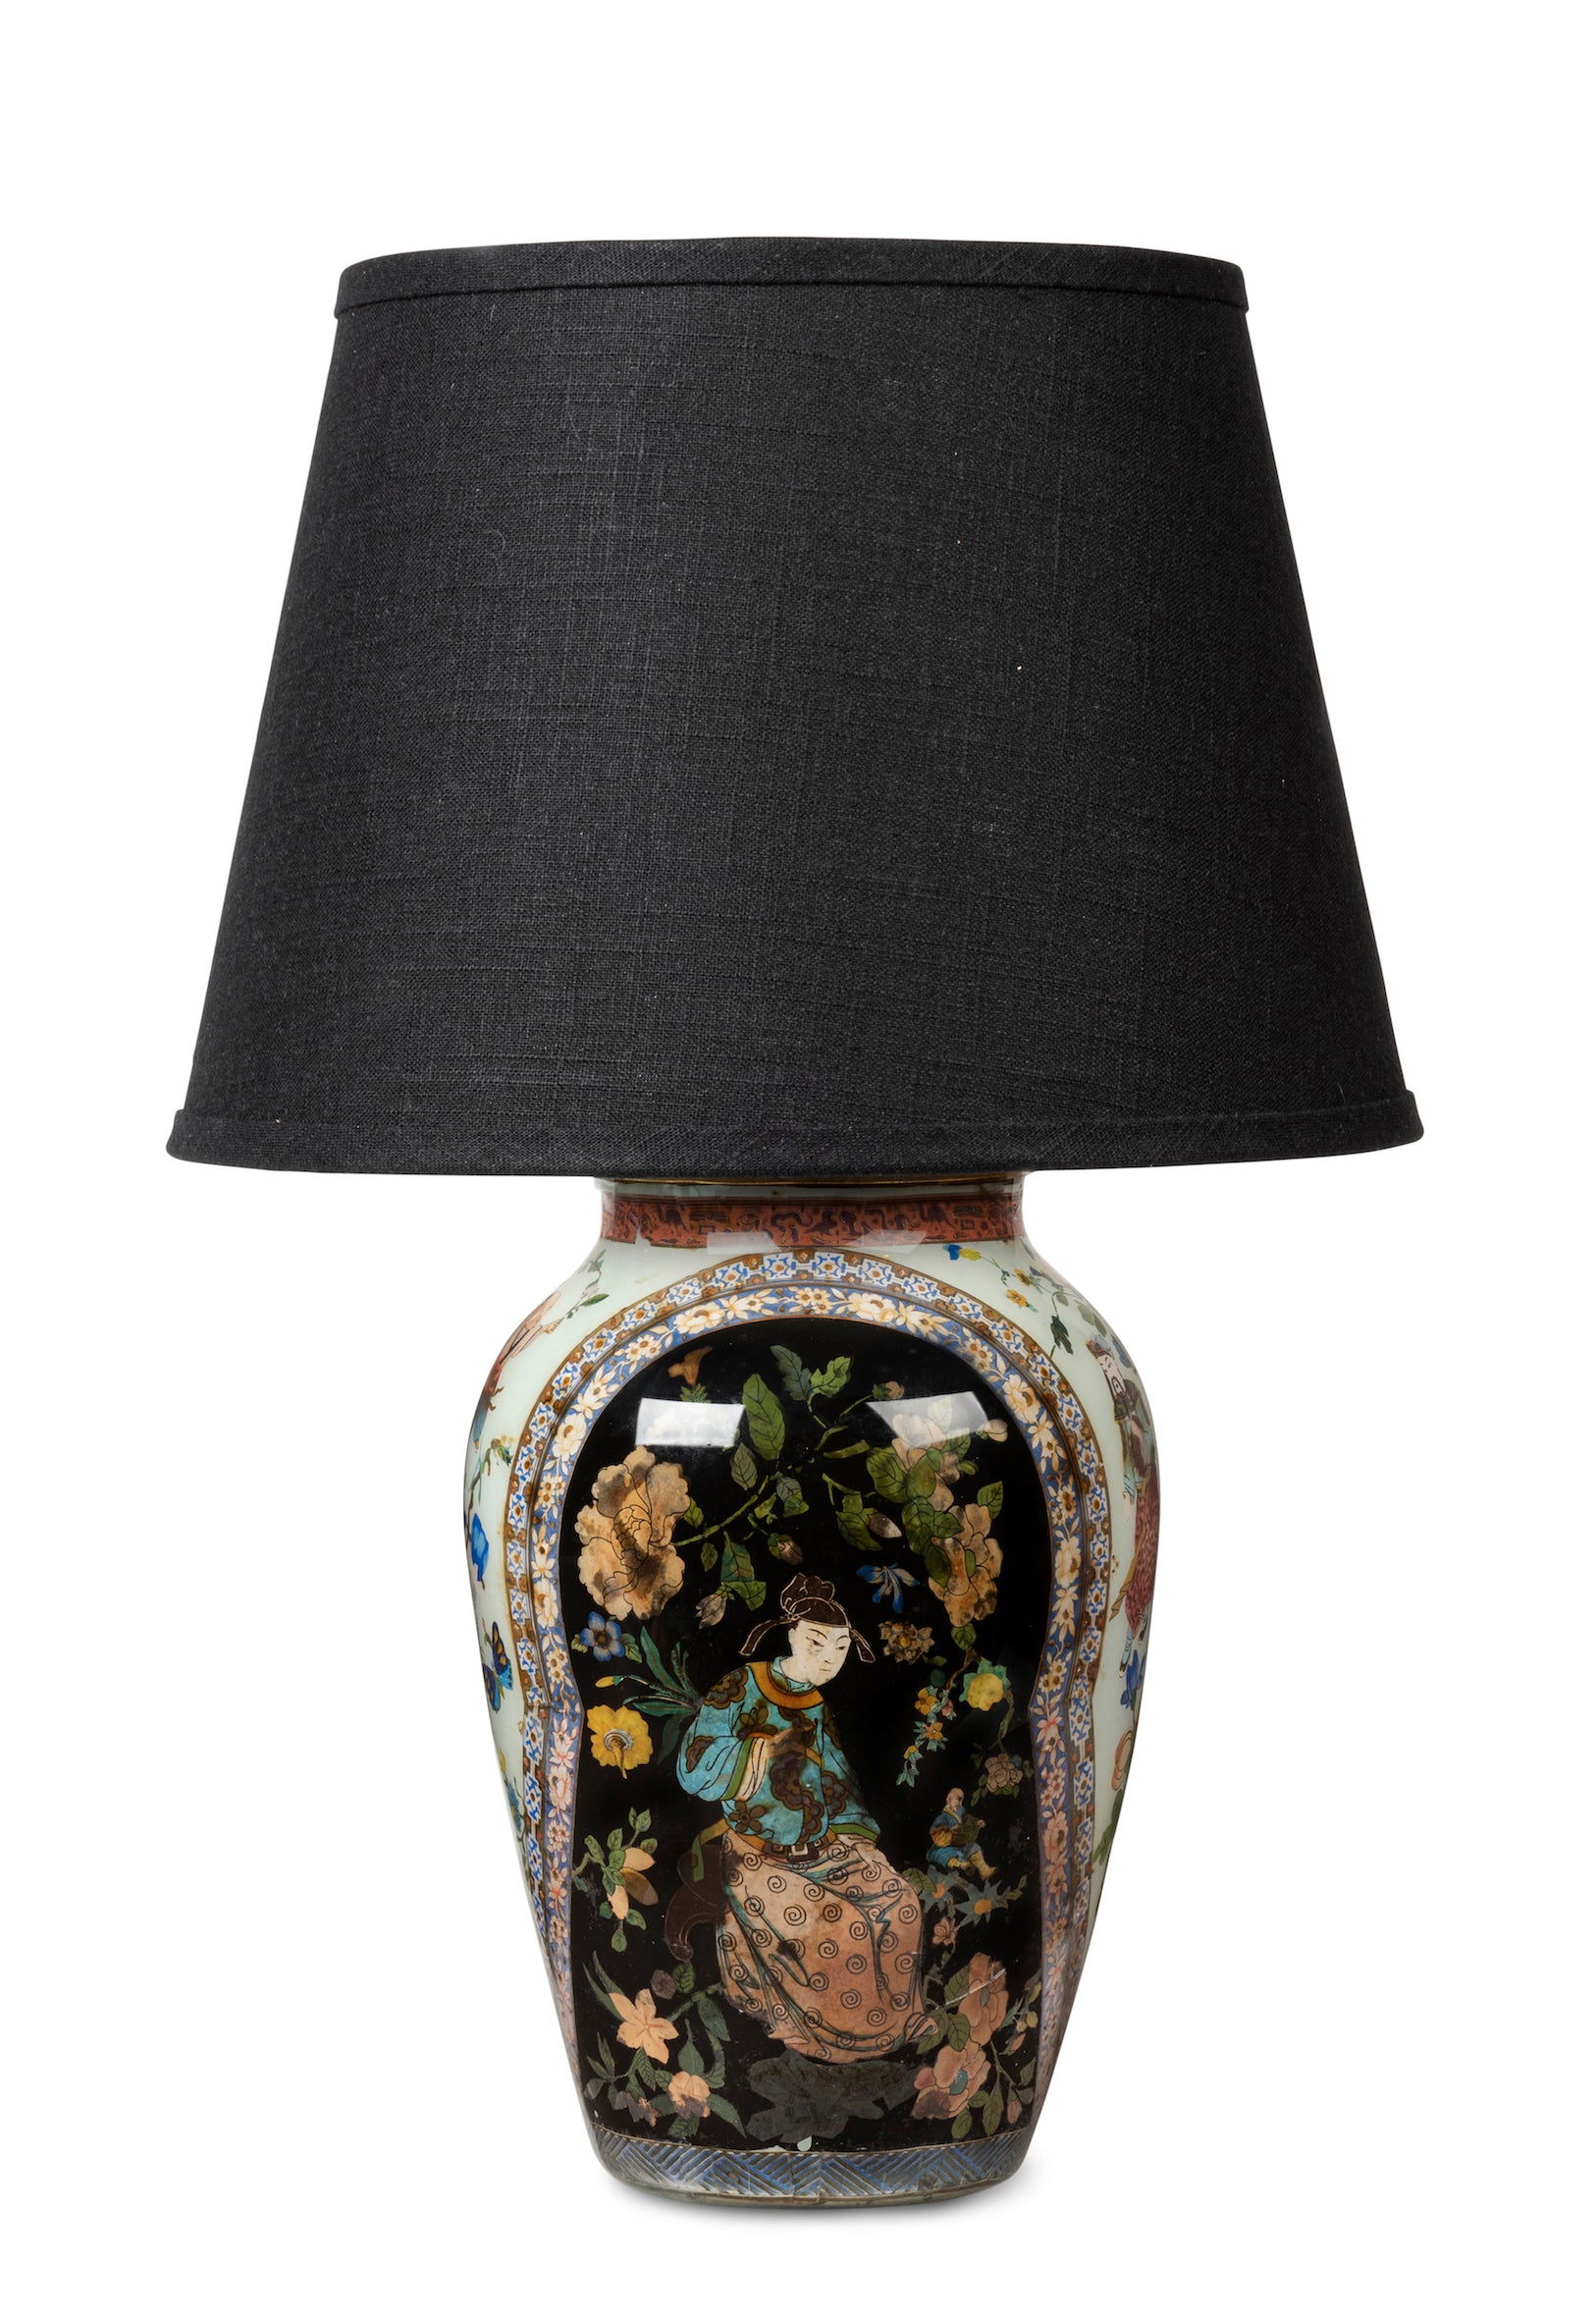 SOLD A highly decorative, Chinoiserie decalomania vase lamp, French 19th Century